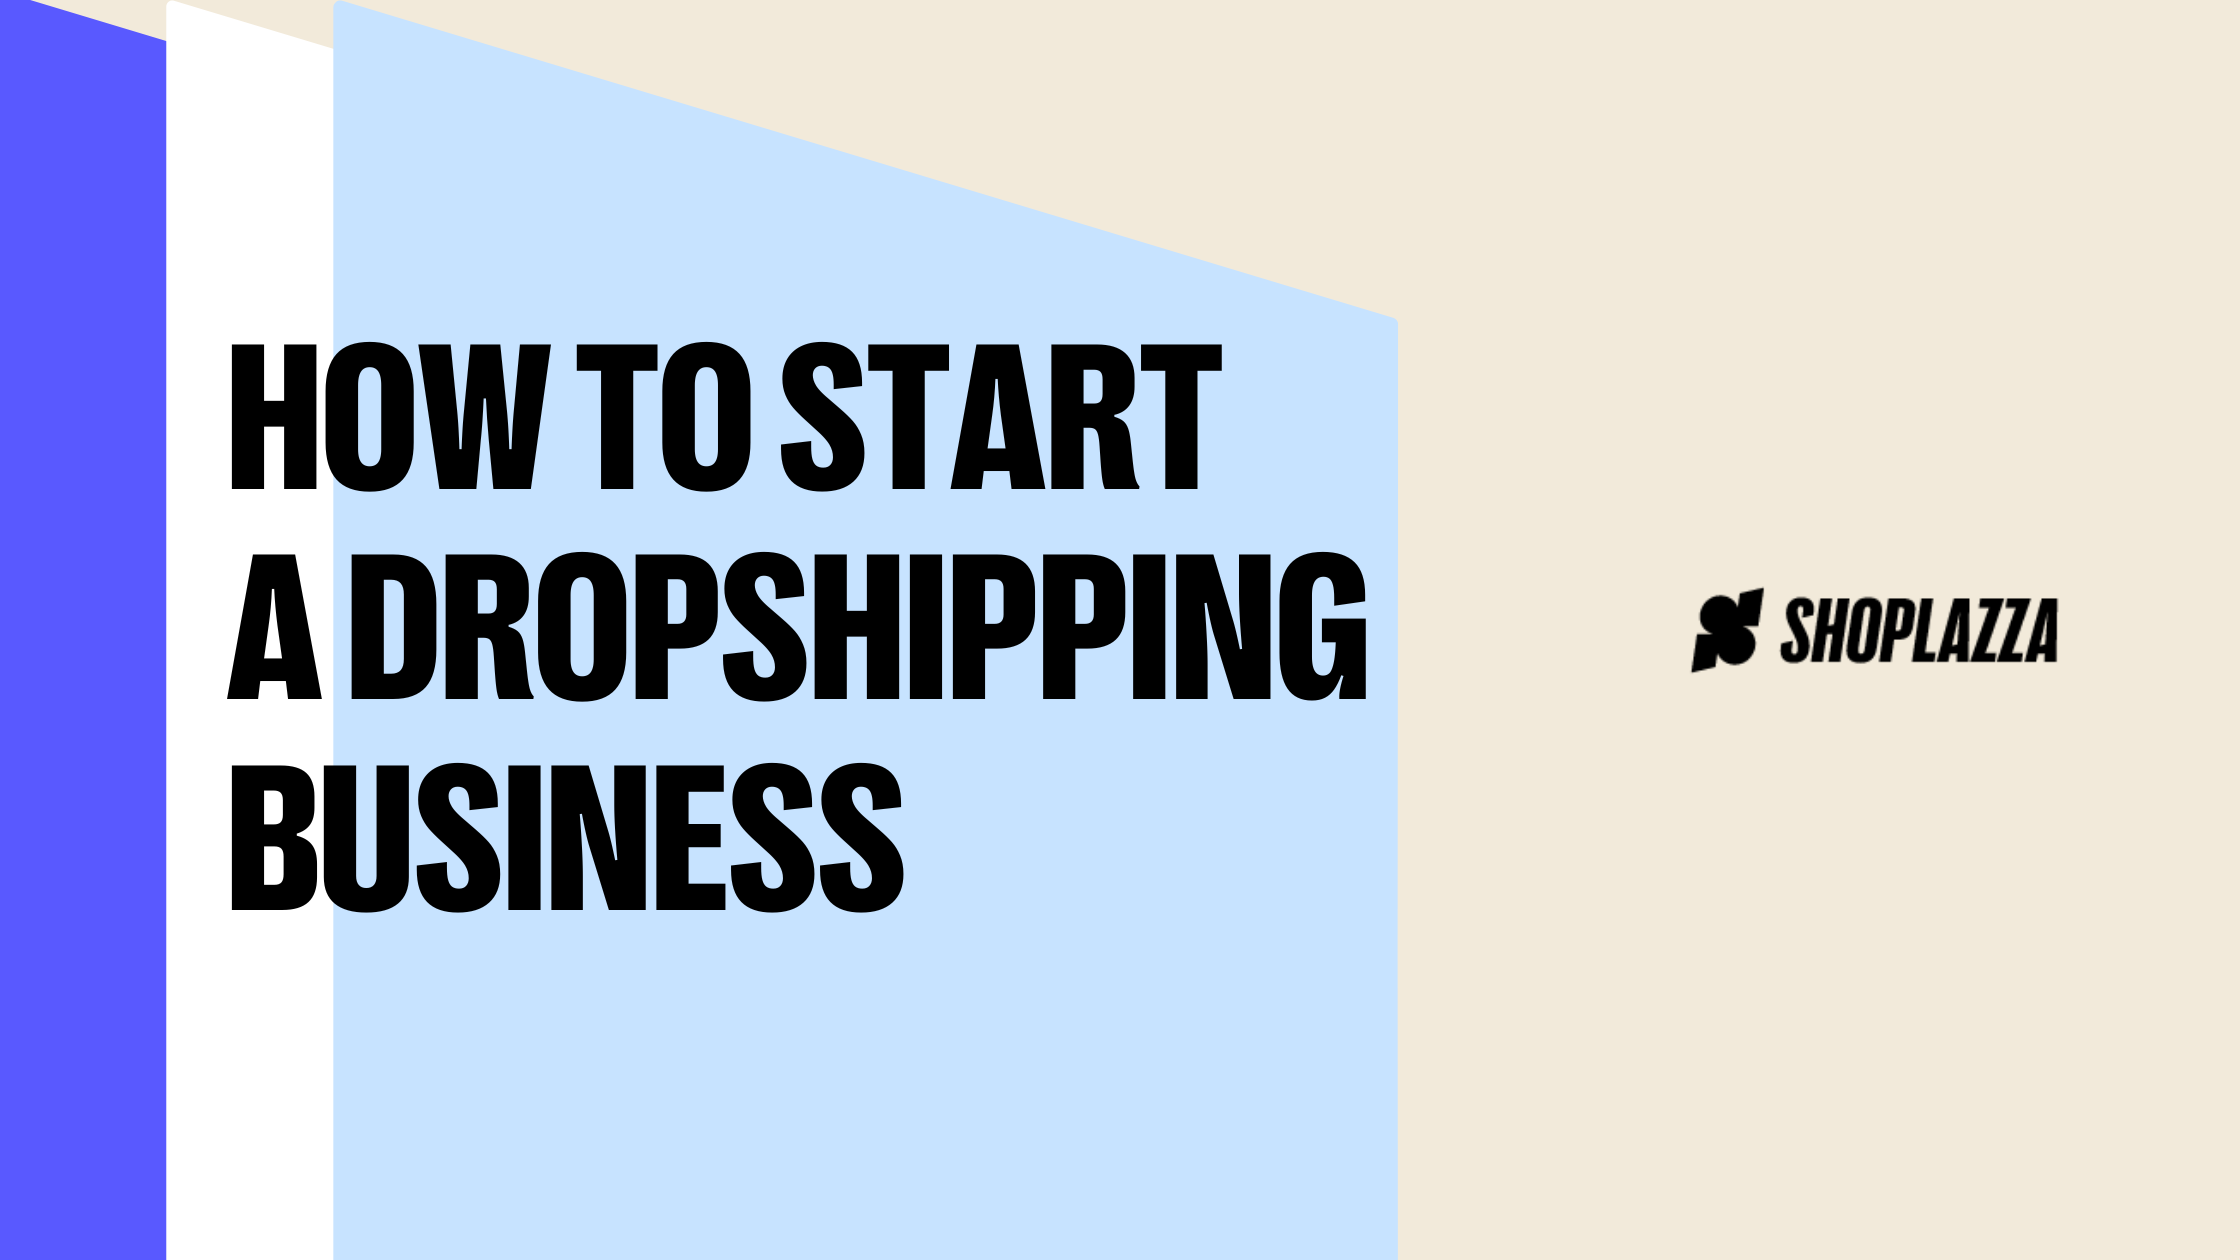 How to Start a Dropshipping Business in 10 Easy Steps